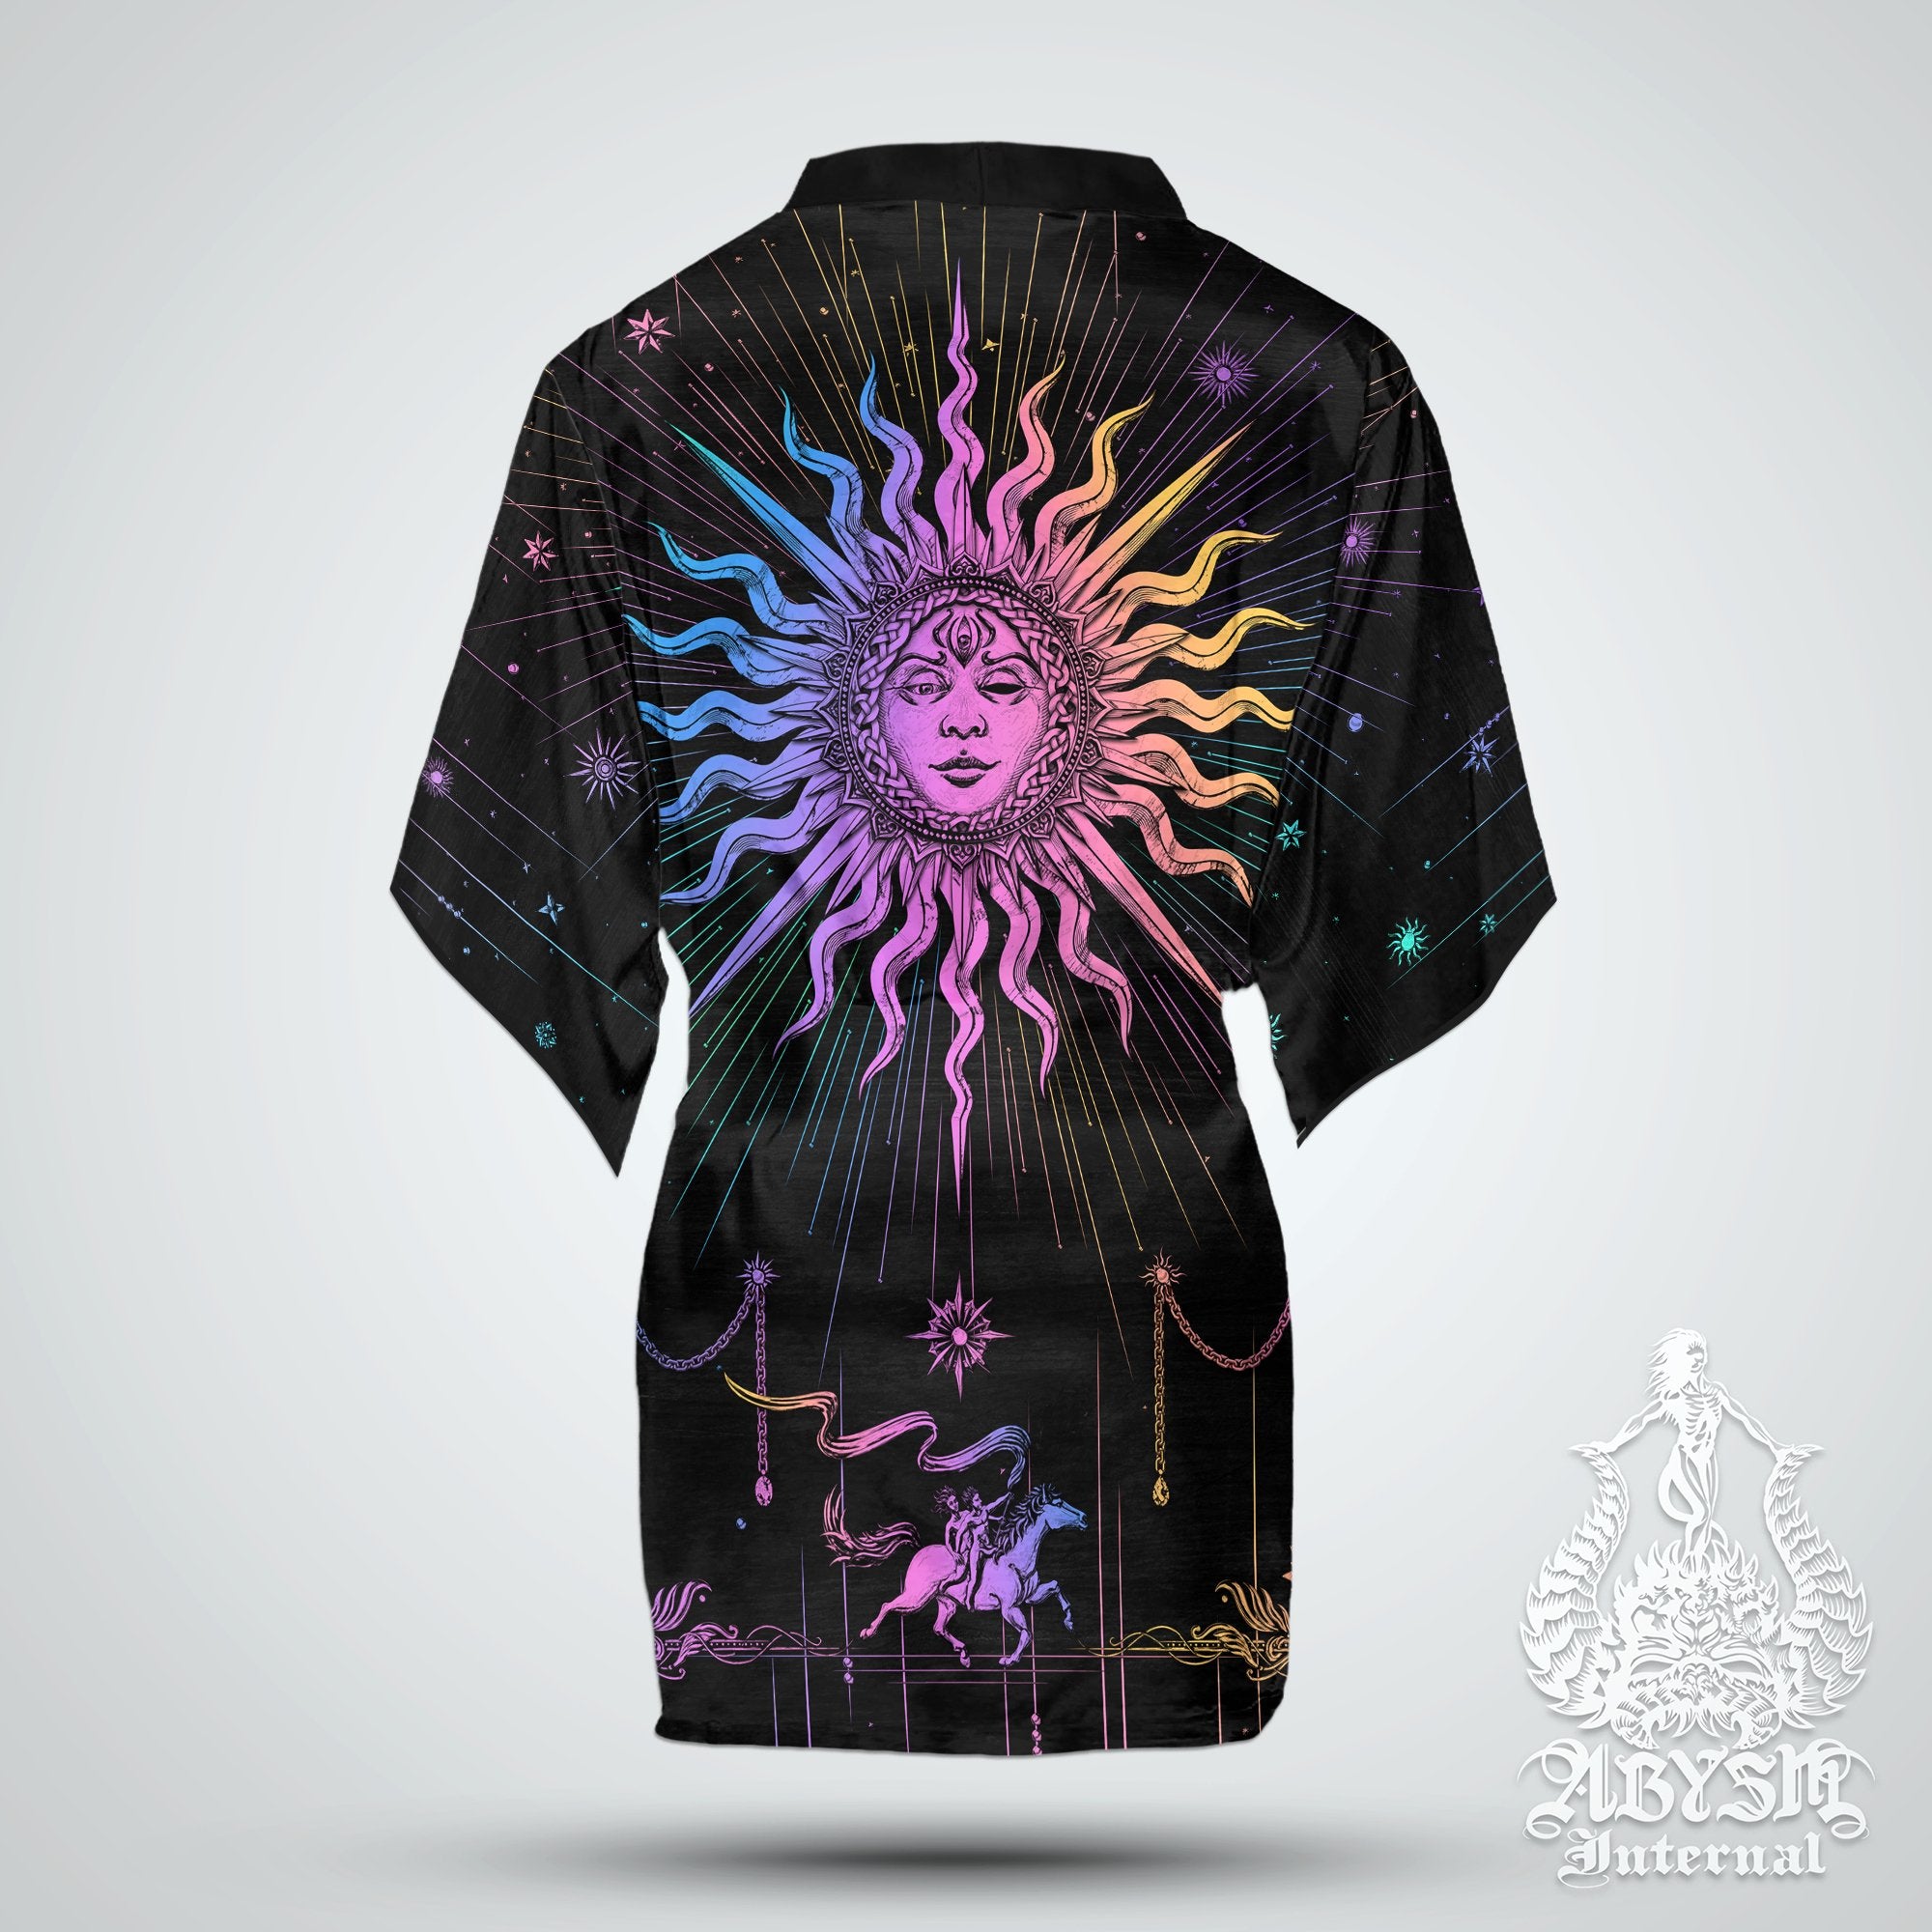 The Sun Short Kimono Robe, Colorful Beach Party Outfit, Tarot Arcana Coverup, Indie and Boho Summer Festival Clothing, Unisex - Dark Pastel - Abysm Internal